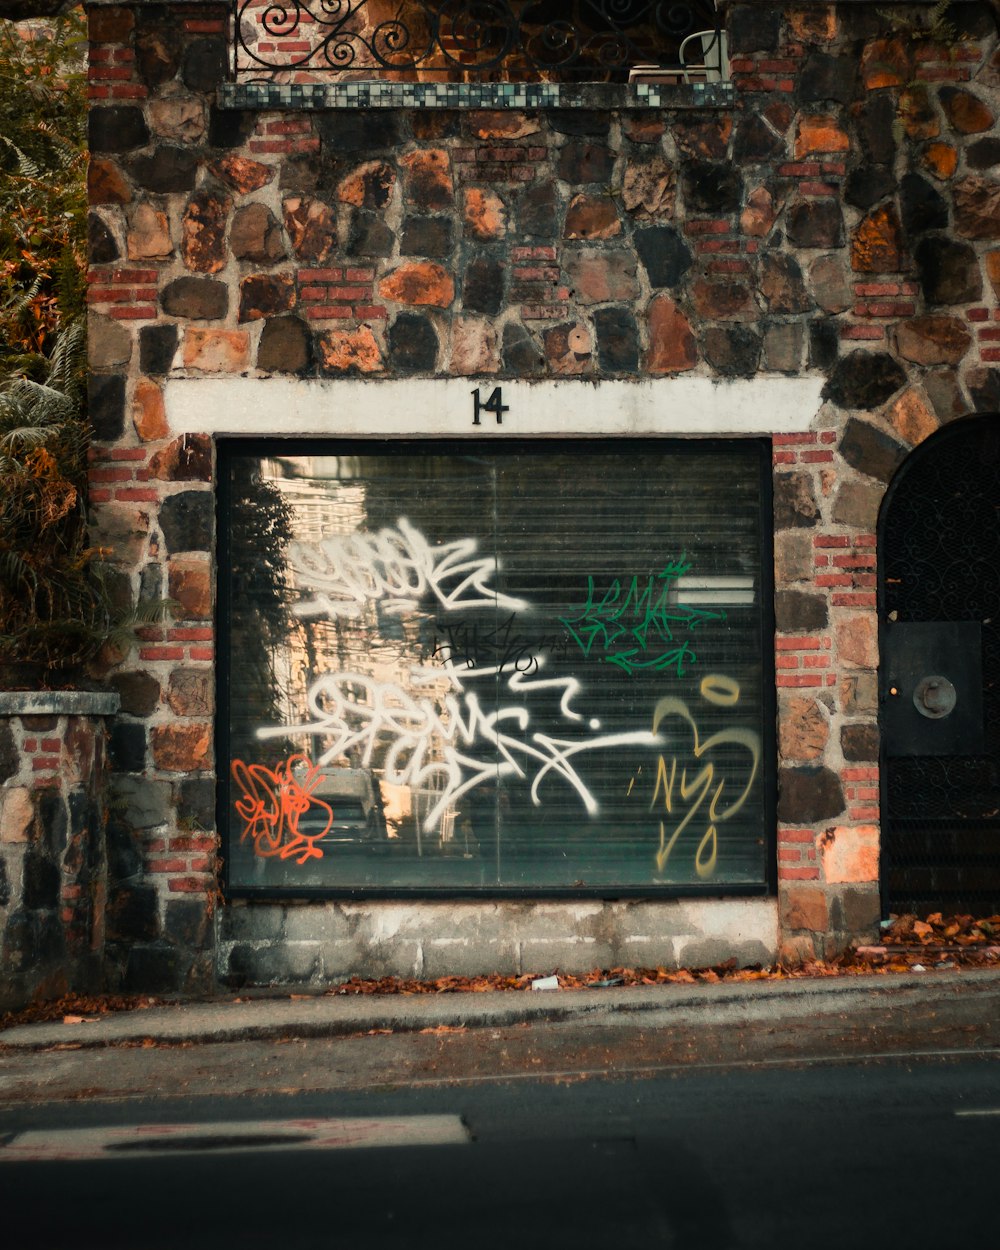 a brick building with graffiti on the side of it